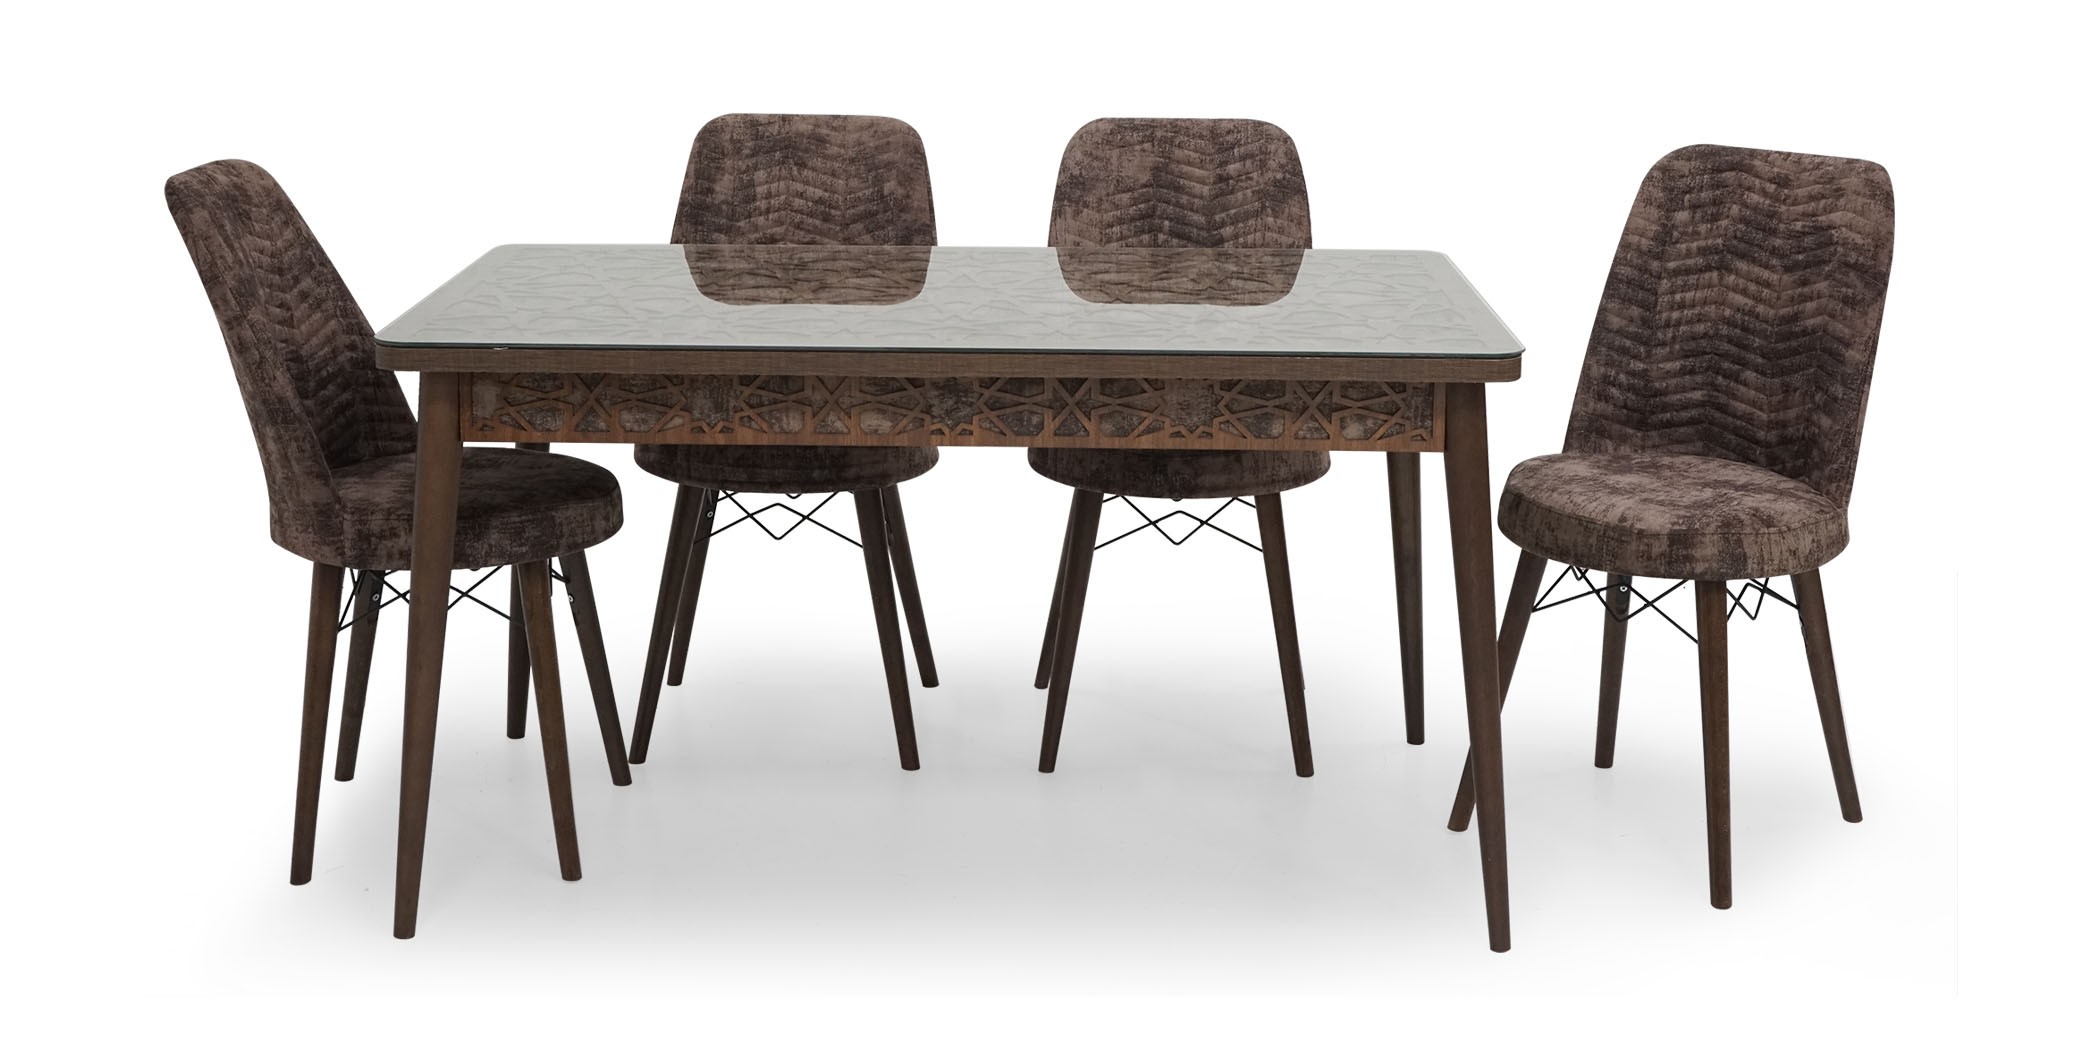 Ceren Table & 6 chairs Brown Moirer